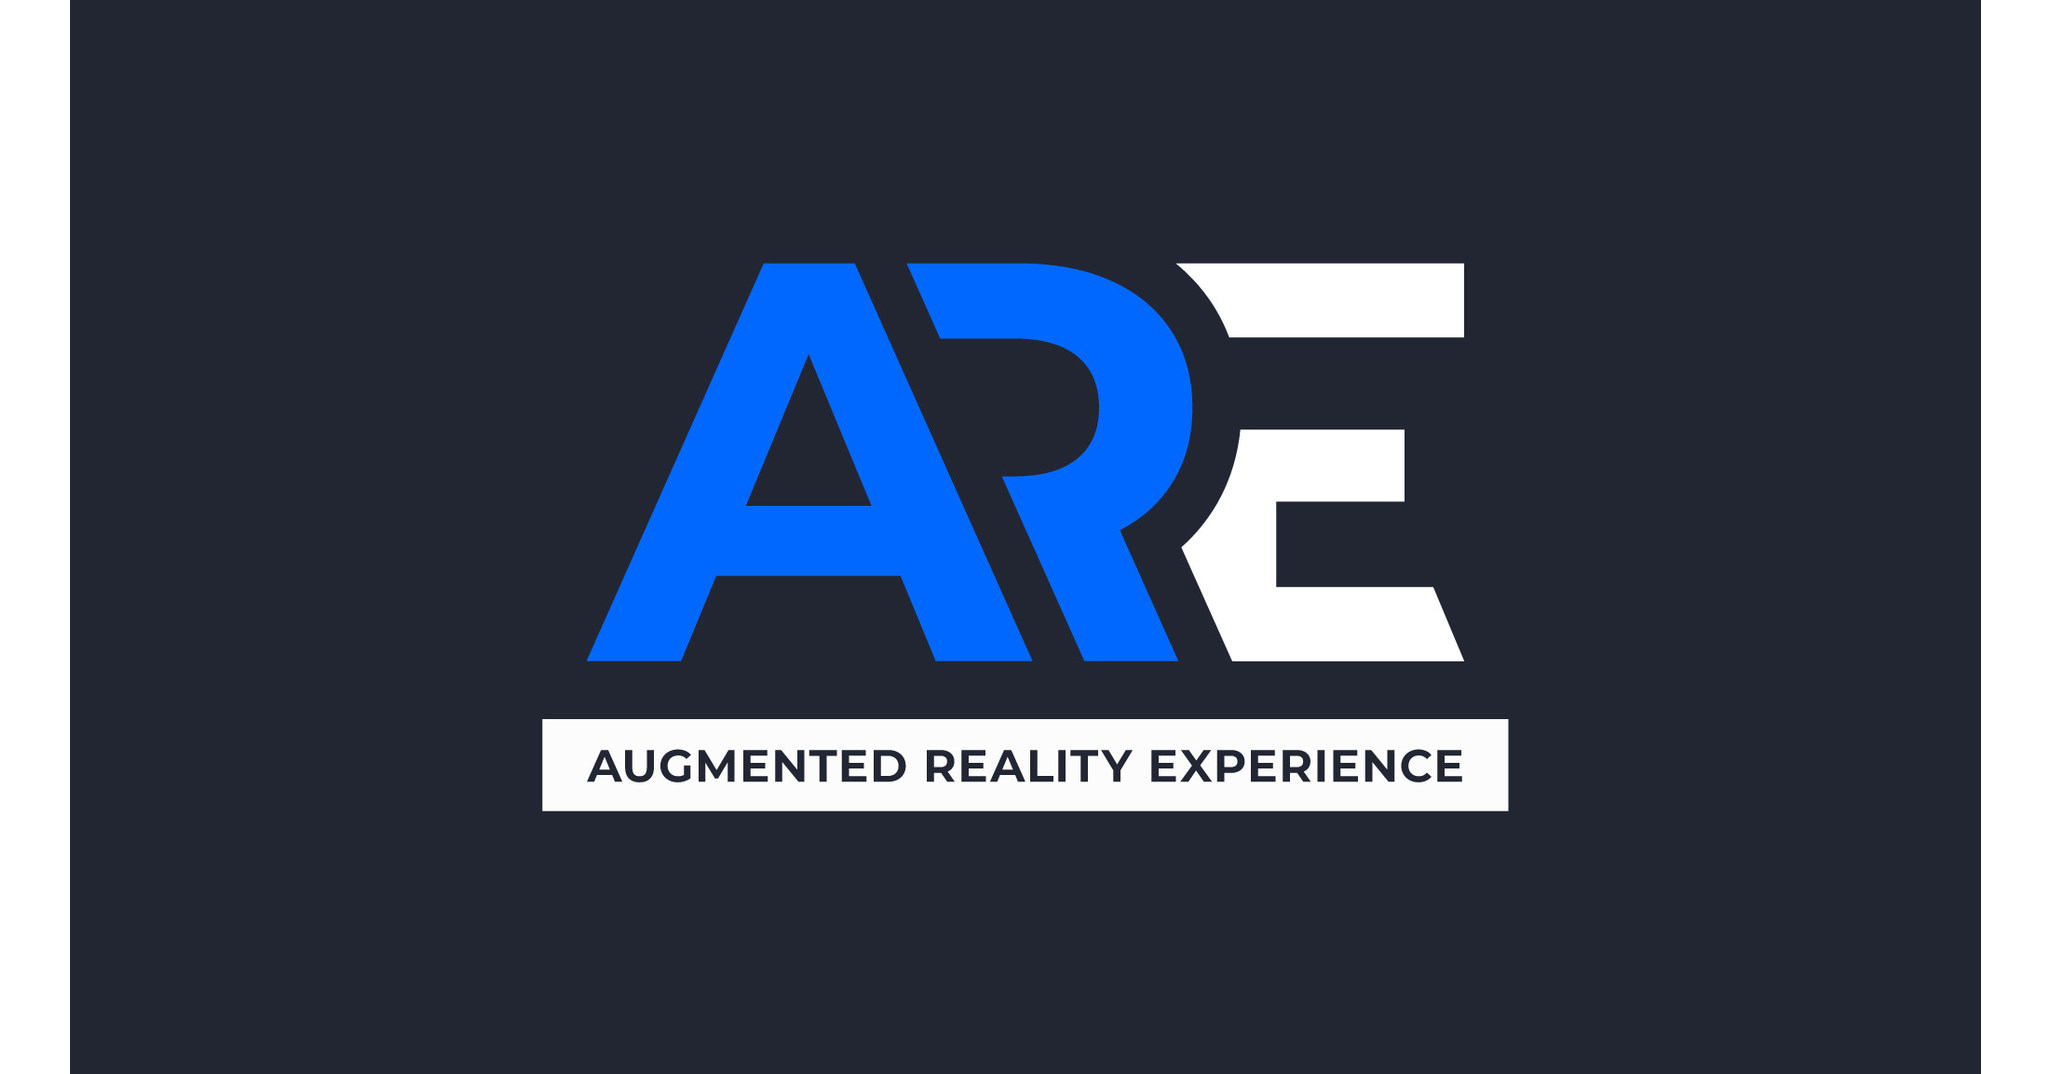 ARExperience, the Premier Augmented Reality and Metaverse Marketing Event, Launches This April in Santa Monica, California